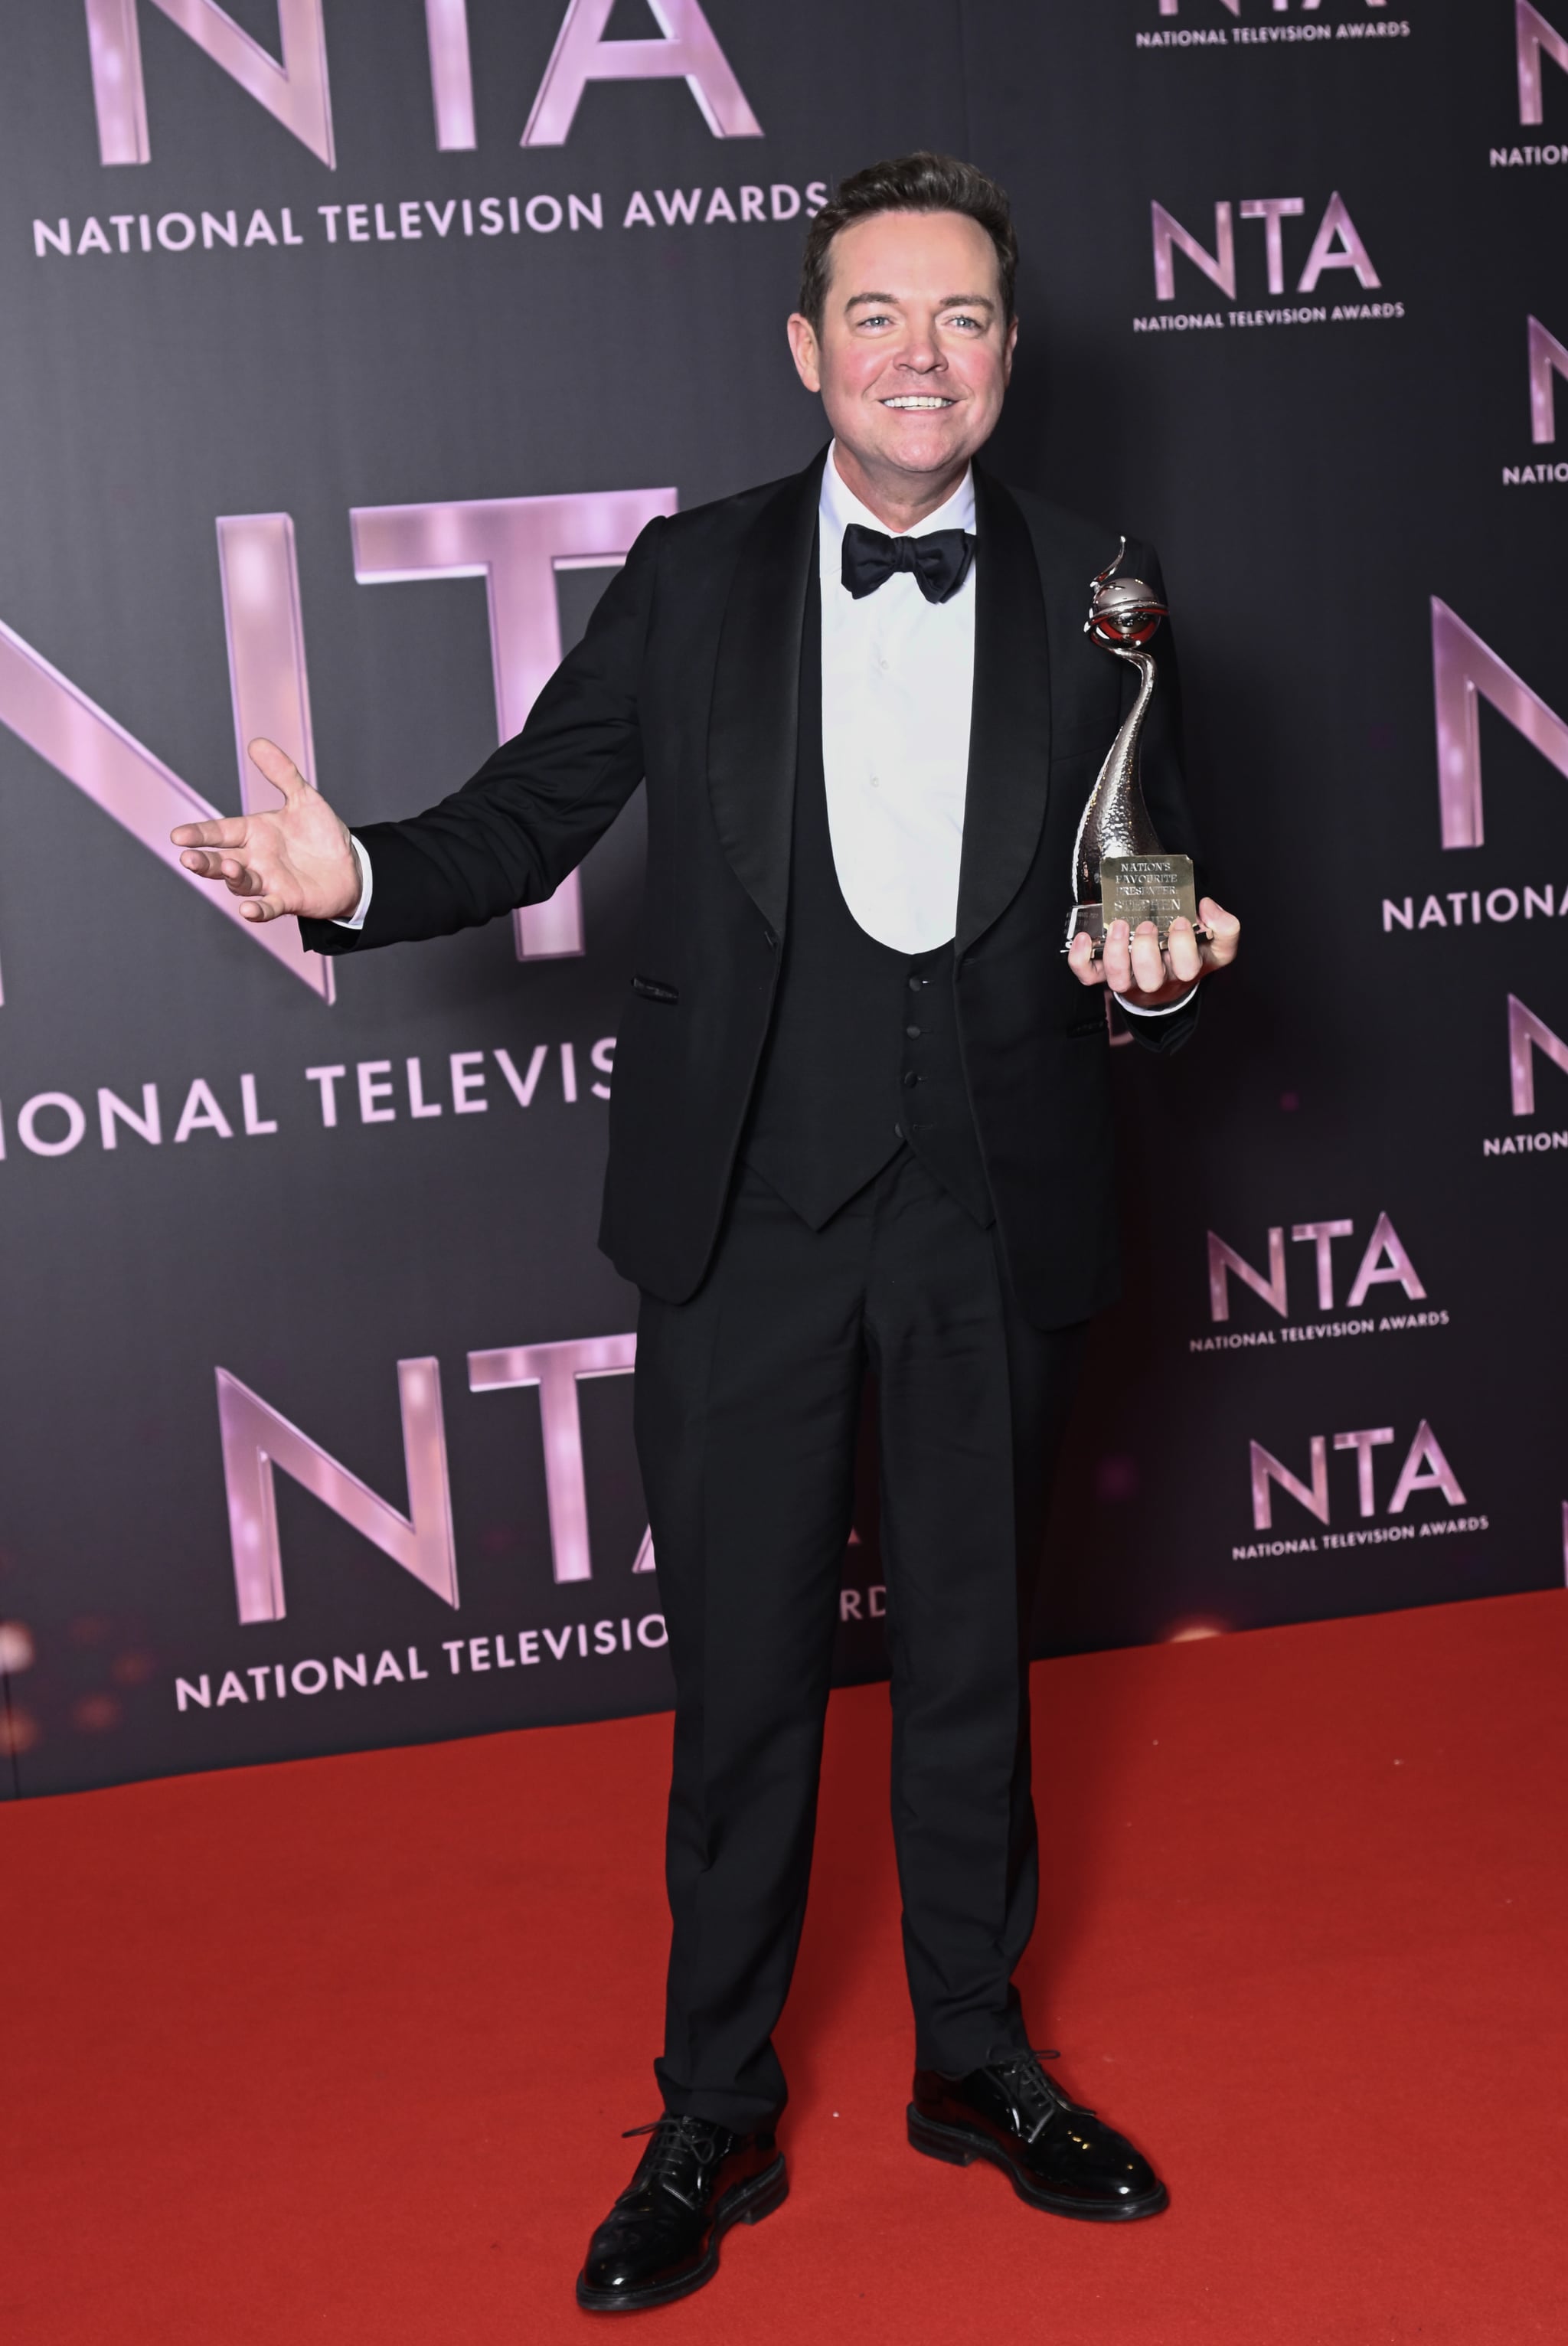 LONDON, ENGLAND - OCTOBER 13: Stephen Mulhern collects the Best TV Presenter award on behalf of Ant & Dec, in the winners' room at the National Television Awards 2022 at OVO Arena Wembley on October 13, 2022 in London, England. (Photo by Gareth Cattermole/Getty Images)